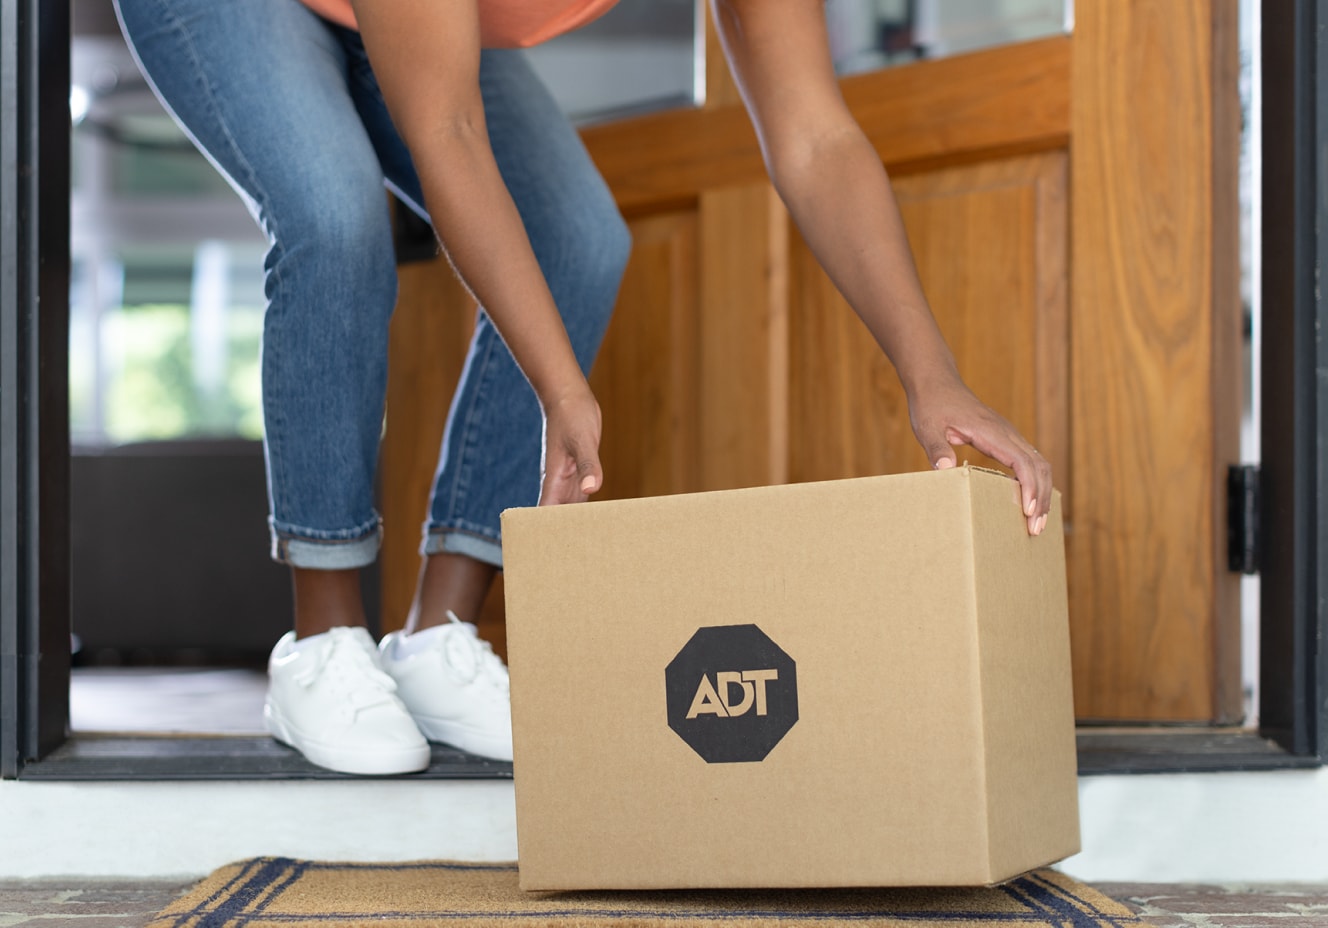 ADT customer getting their ADT package delivered